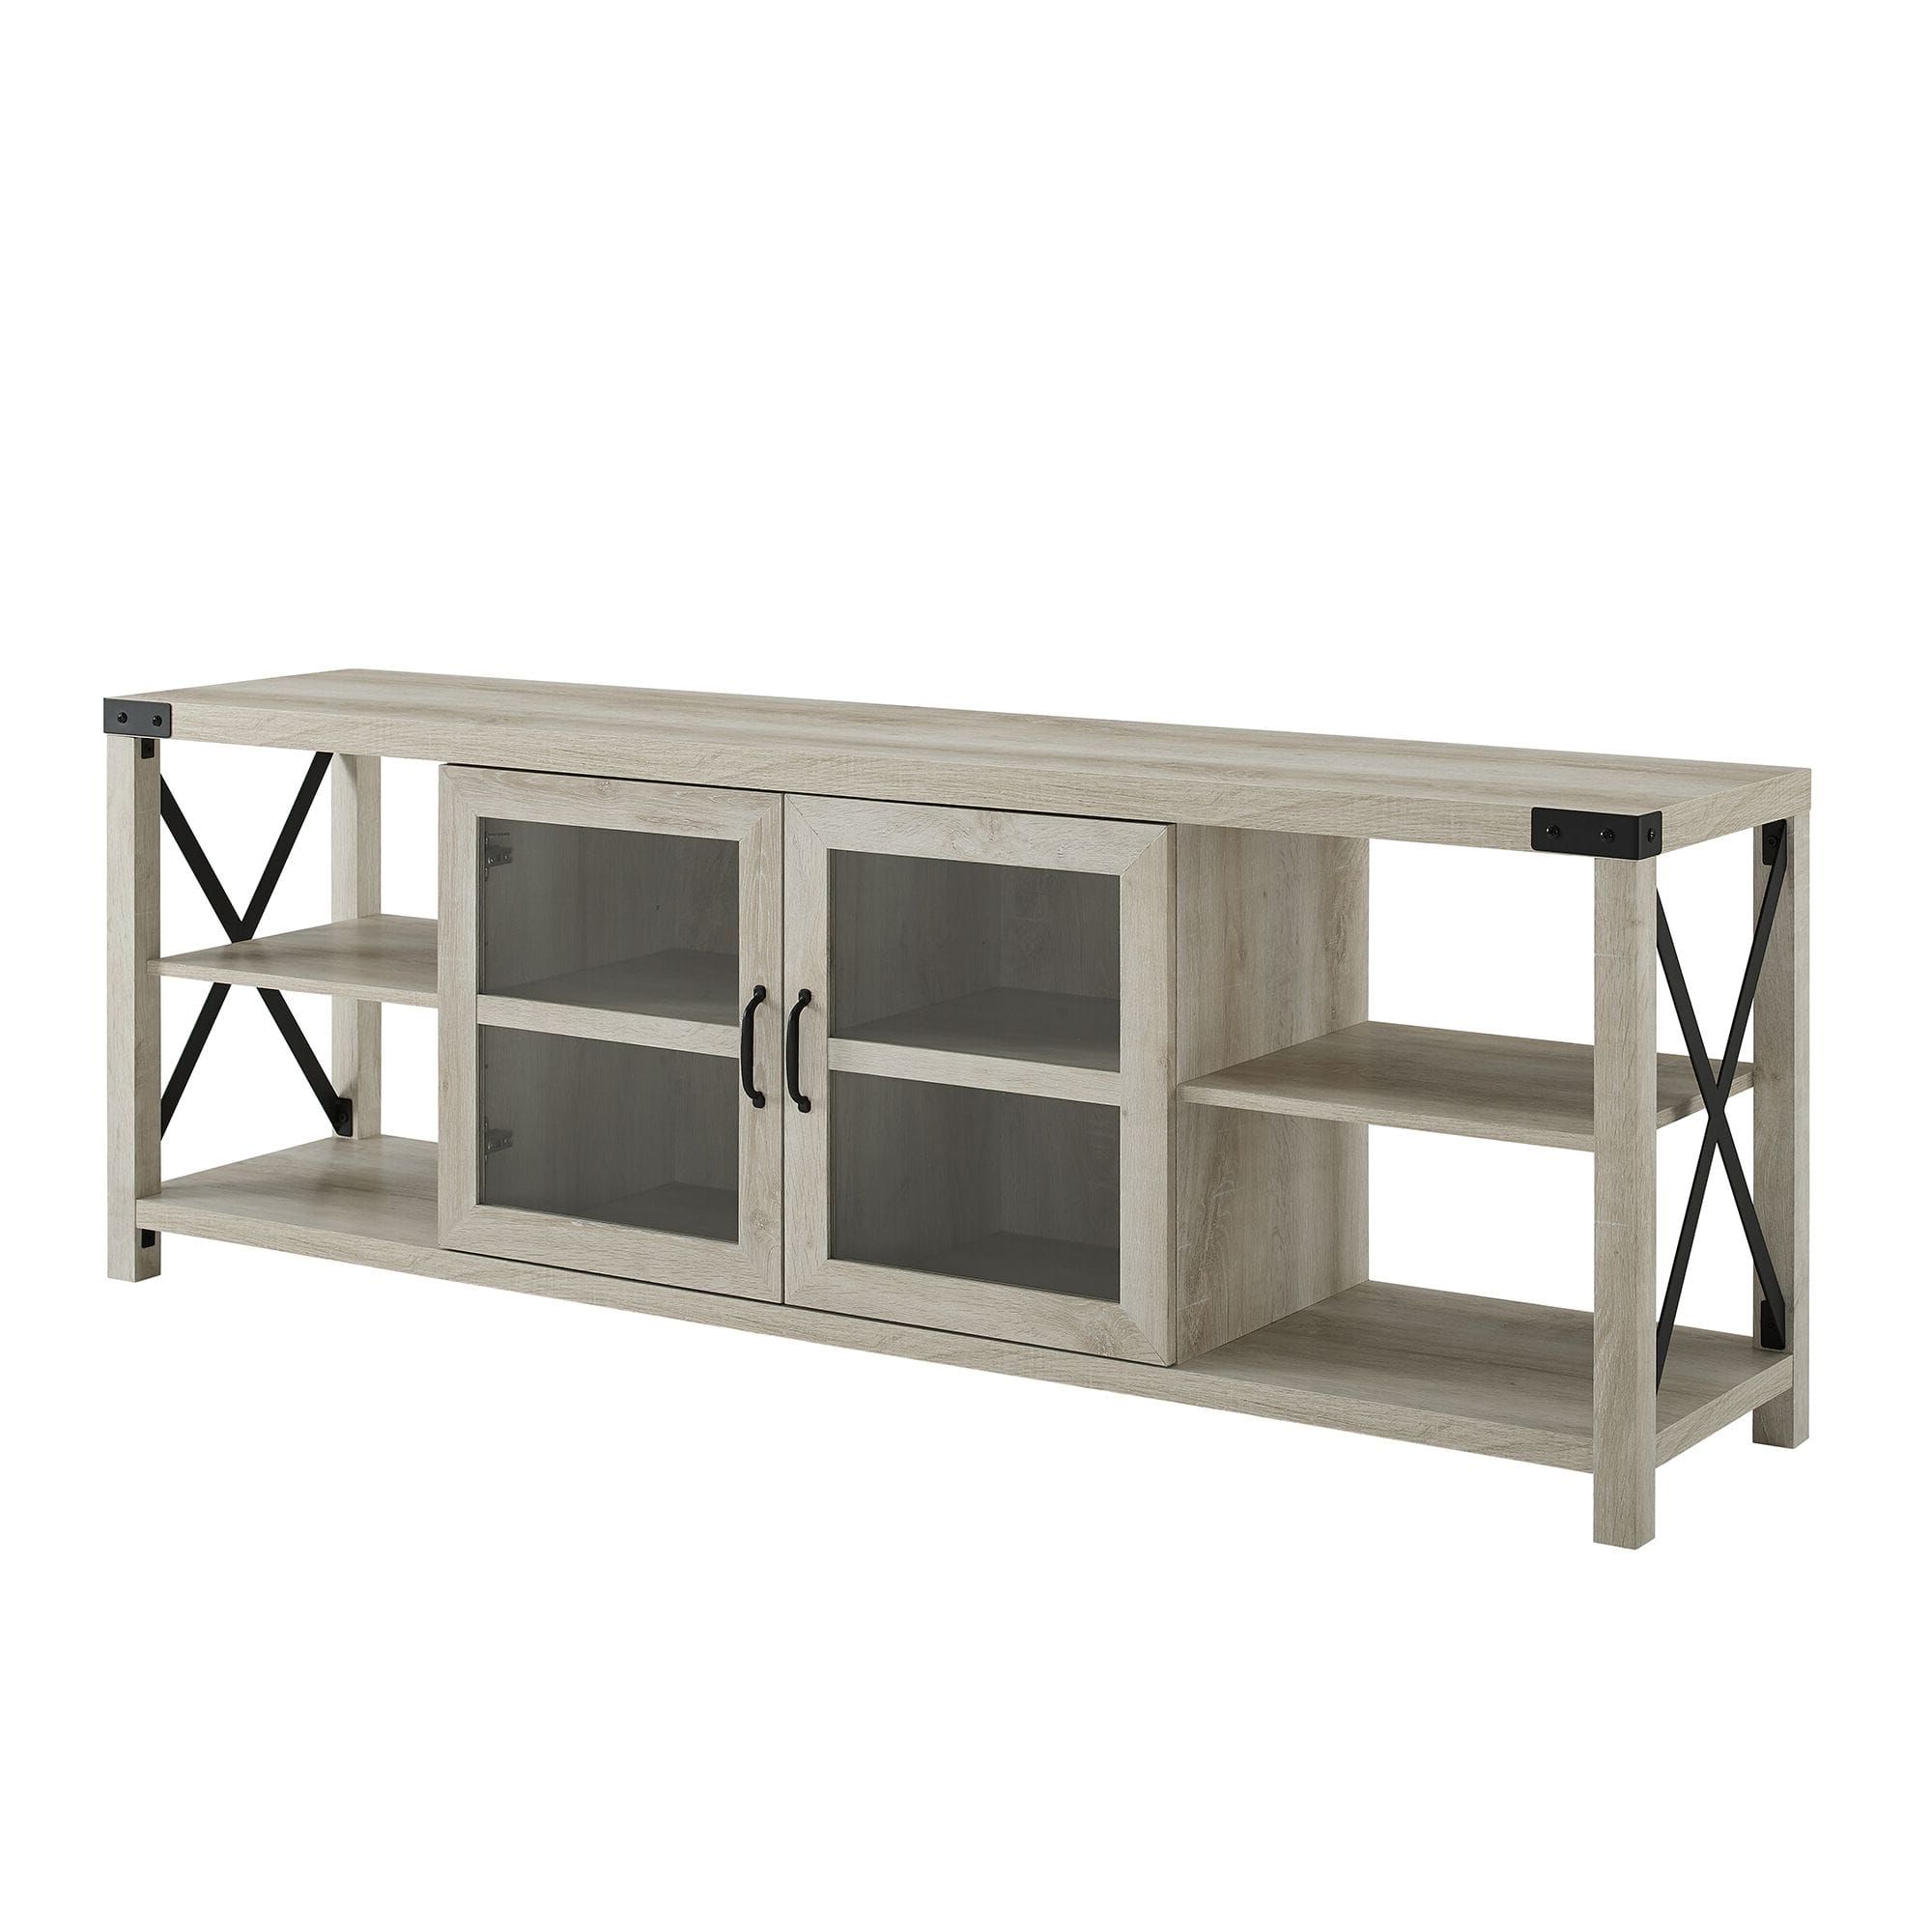 2019 70 Inch Farmhouse Metal X Tv Stand – White Oakwalker Edison Inside Farmhouse Tv Stands For 70 Inch Tv (View 10 of 15)